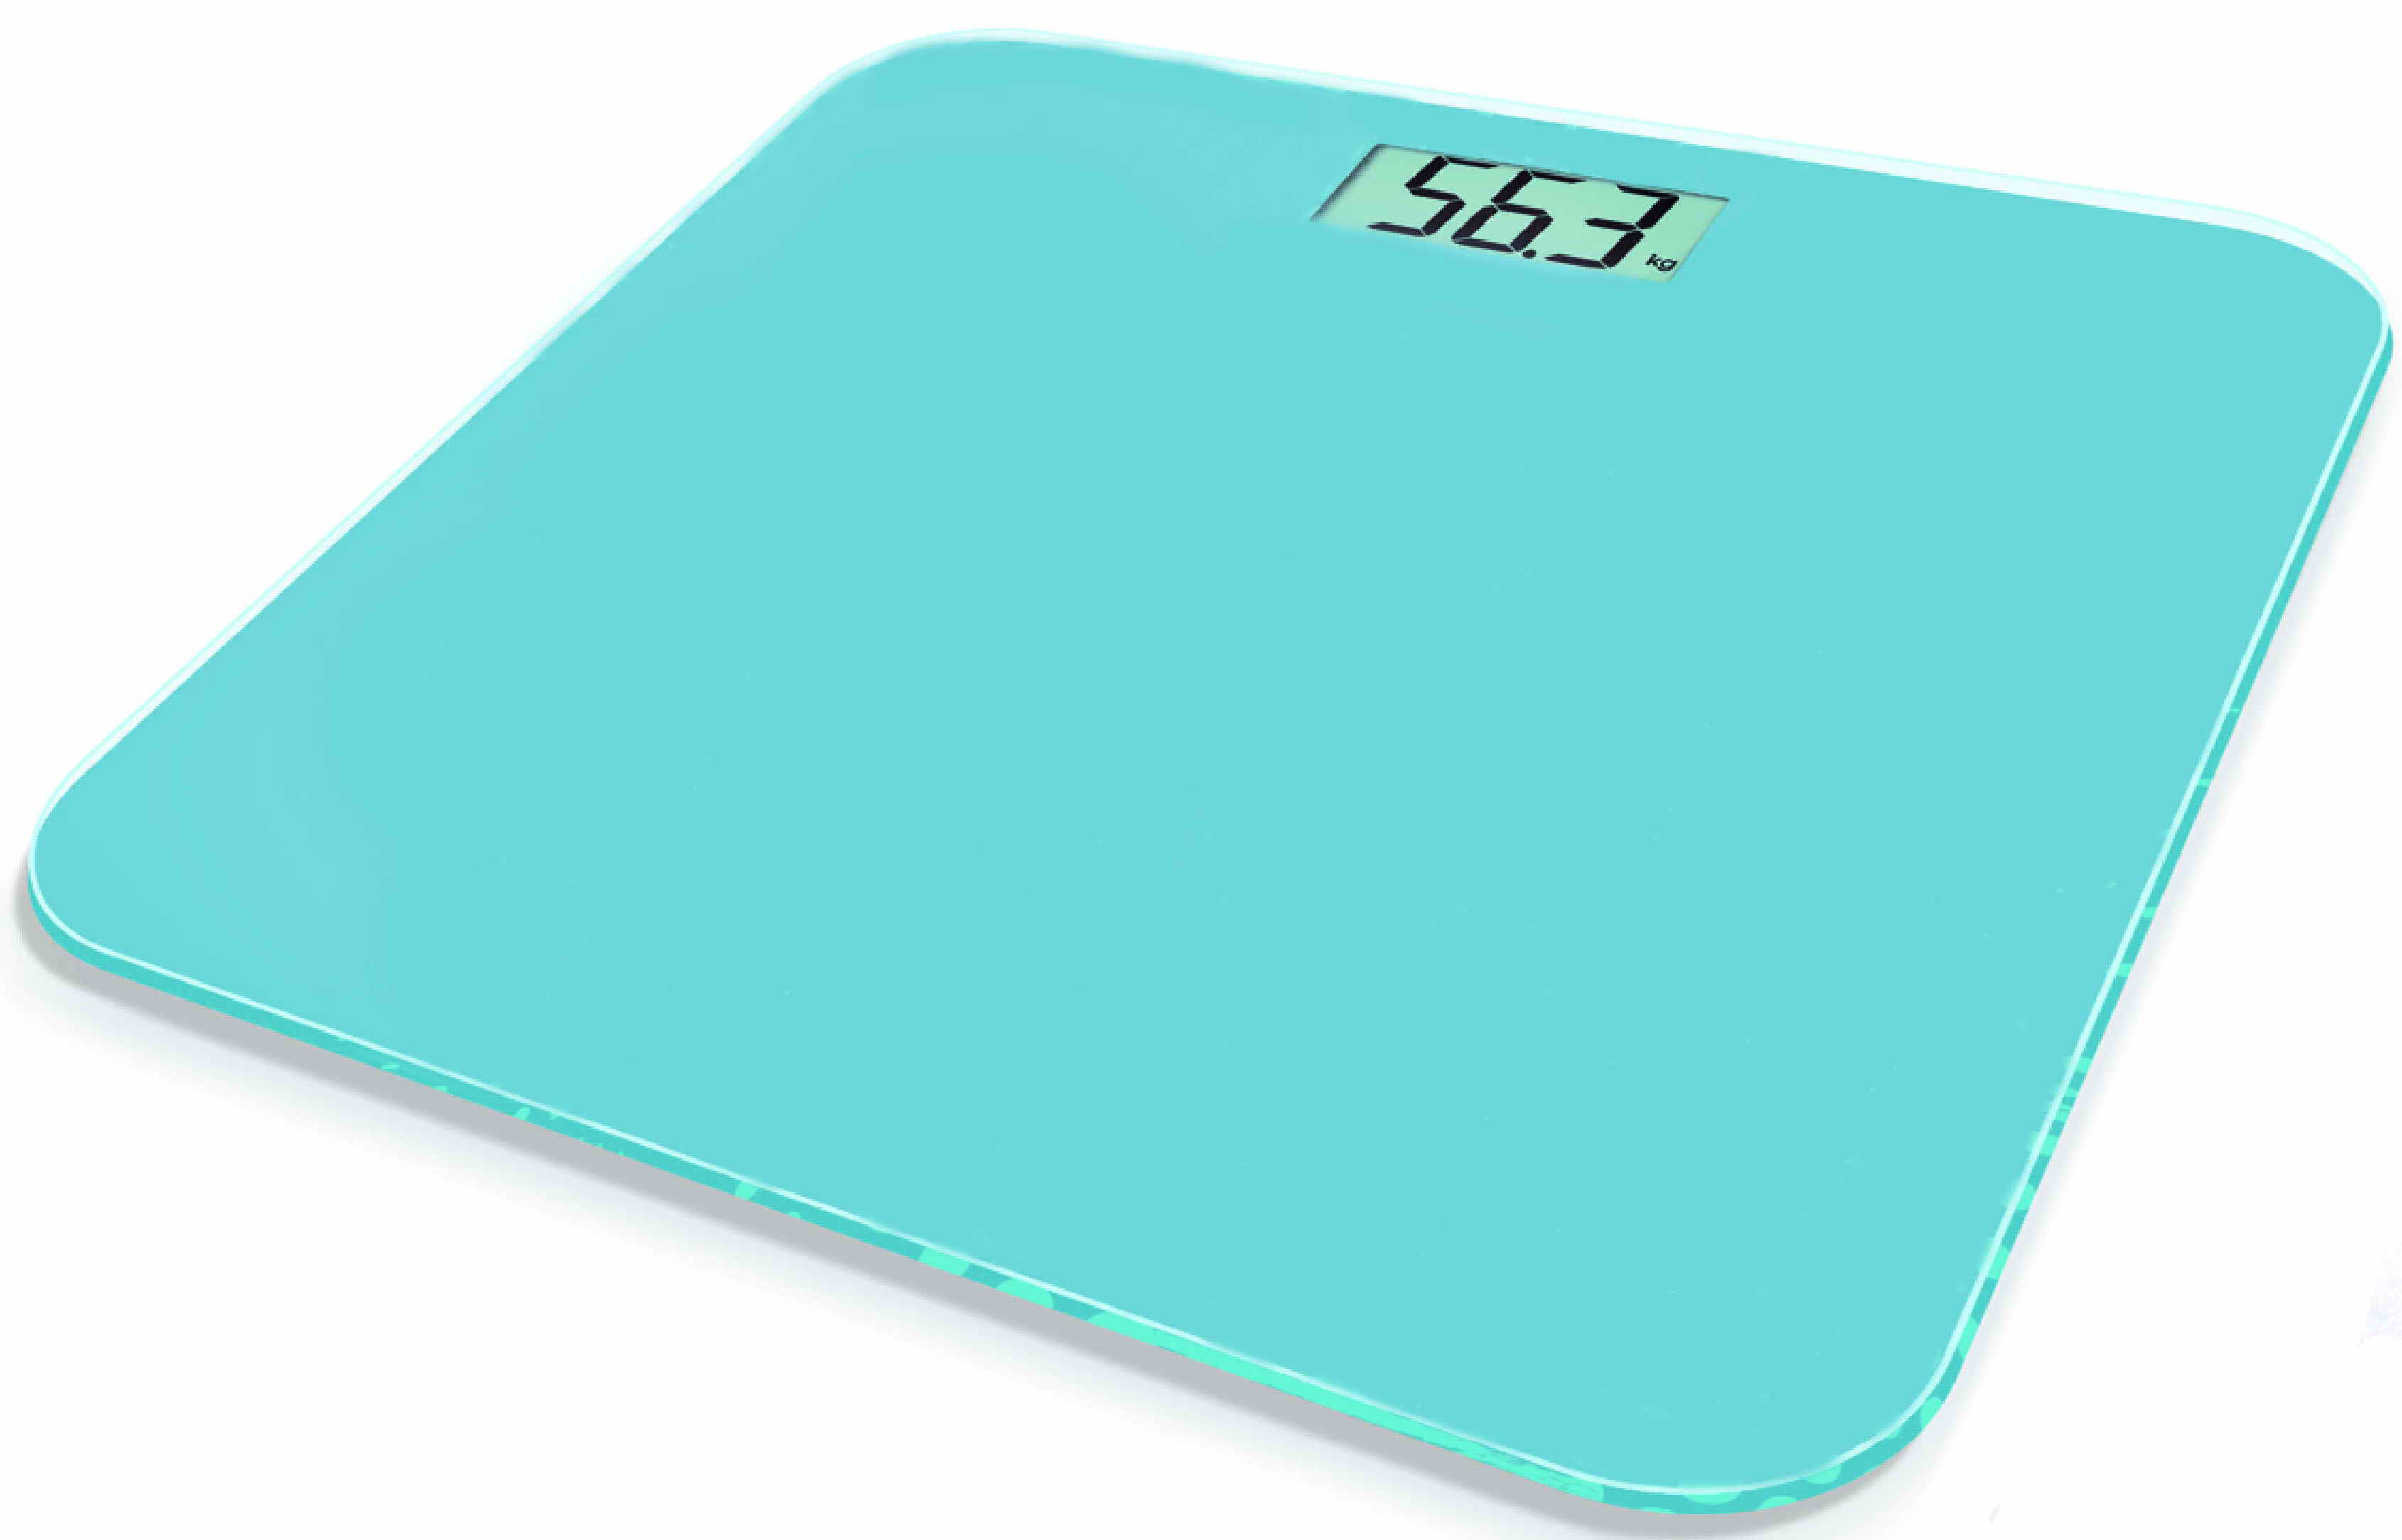 Bathroom scale with silk screen printing